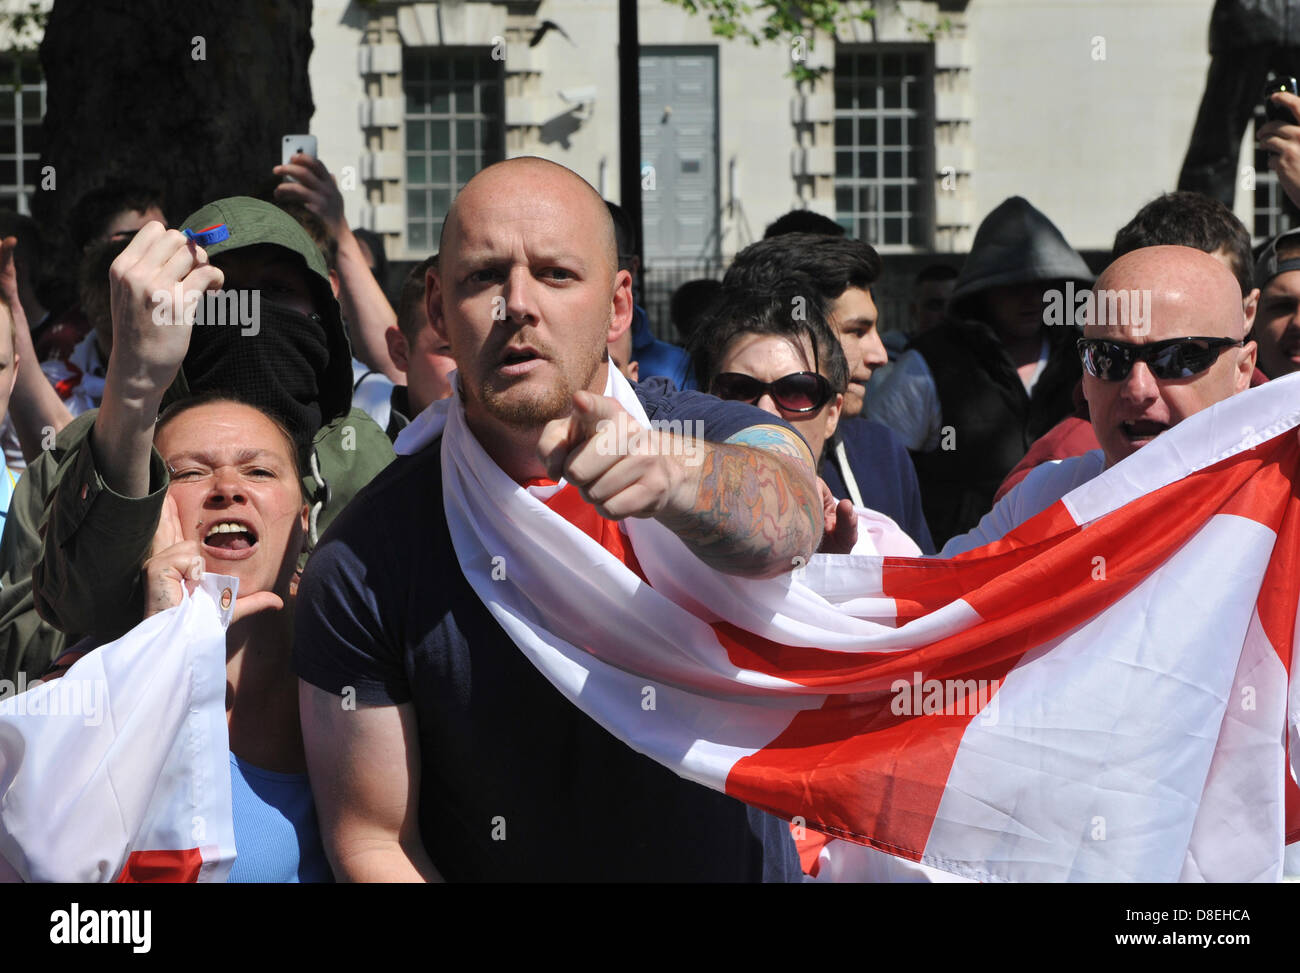 Whitehall, London, UK. 27th May 2013. Members of the EDL make their way towards Downing Street behind barriers and under police escort to seperate them from the counter demonstration. The EDL demonstration prompted by the death of Drummer Lee Rigby and a counter demonstration cause chaos on Whitehall as they move towards Downing Street. Credit: Matthew Chattle/Alamy Live News Stock Photo